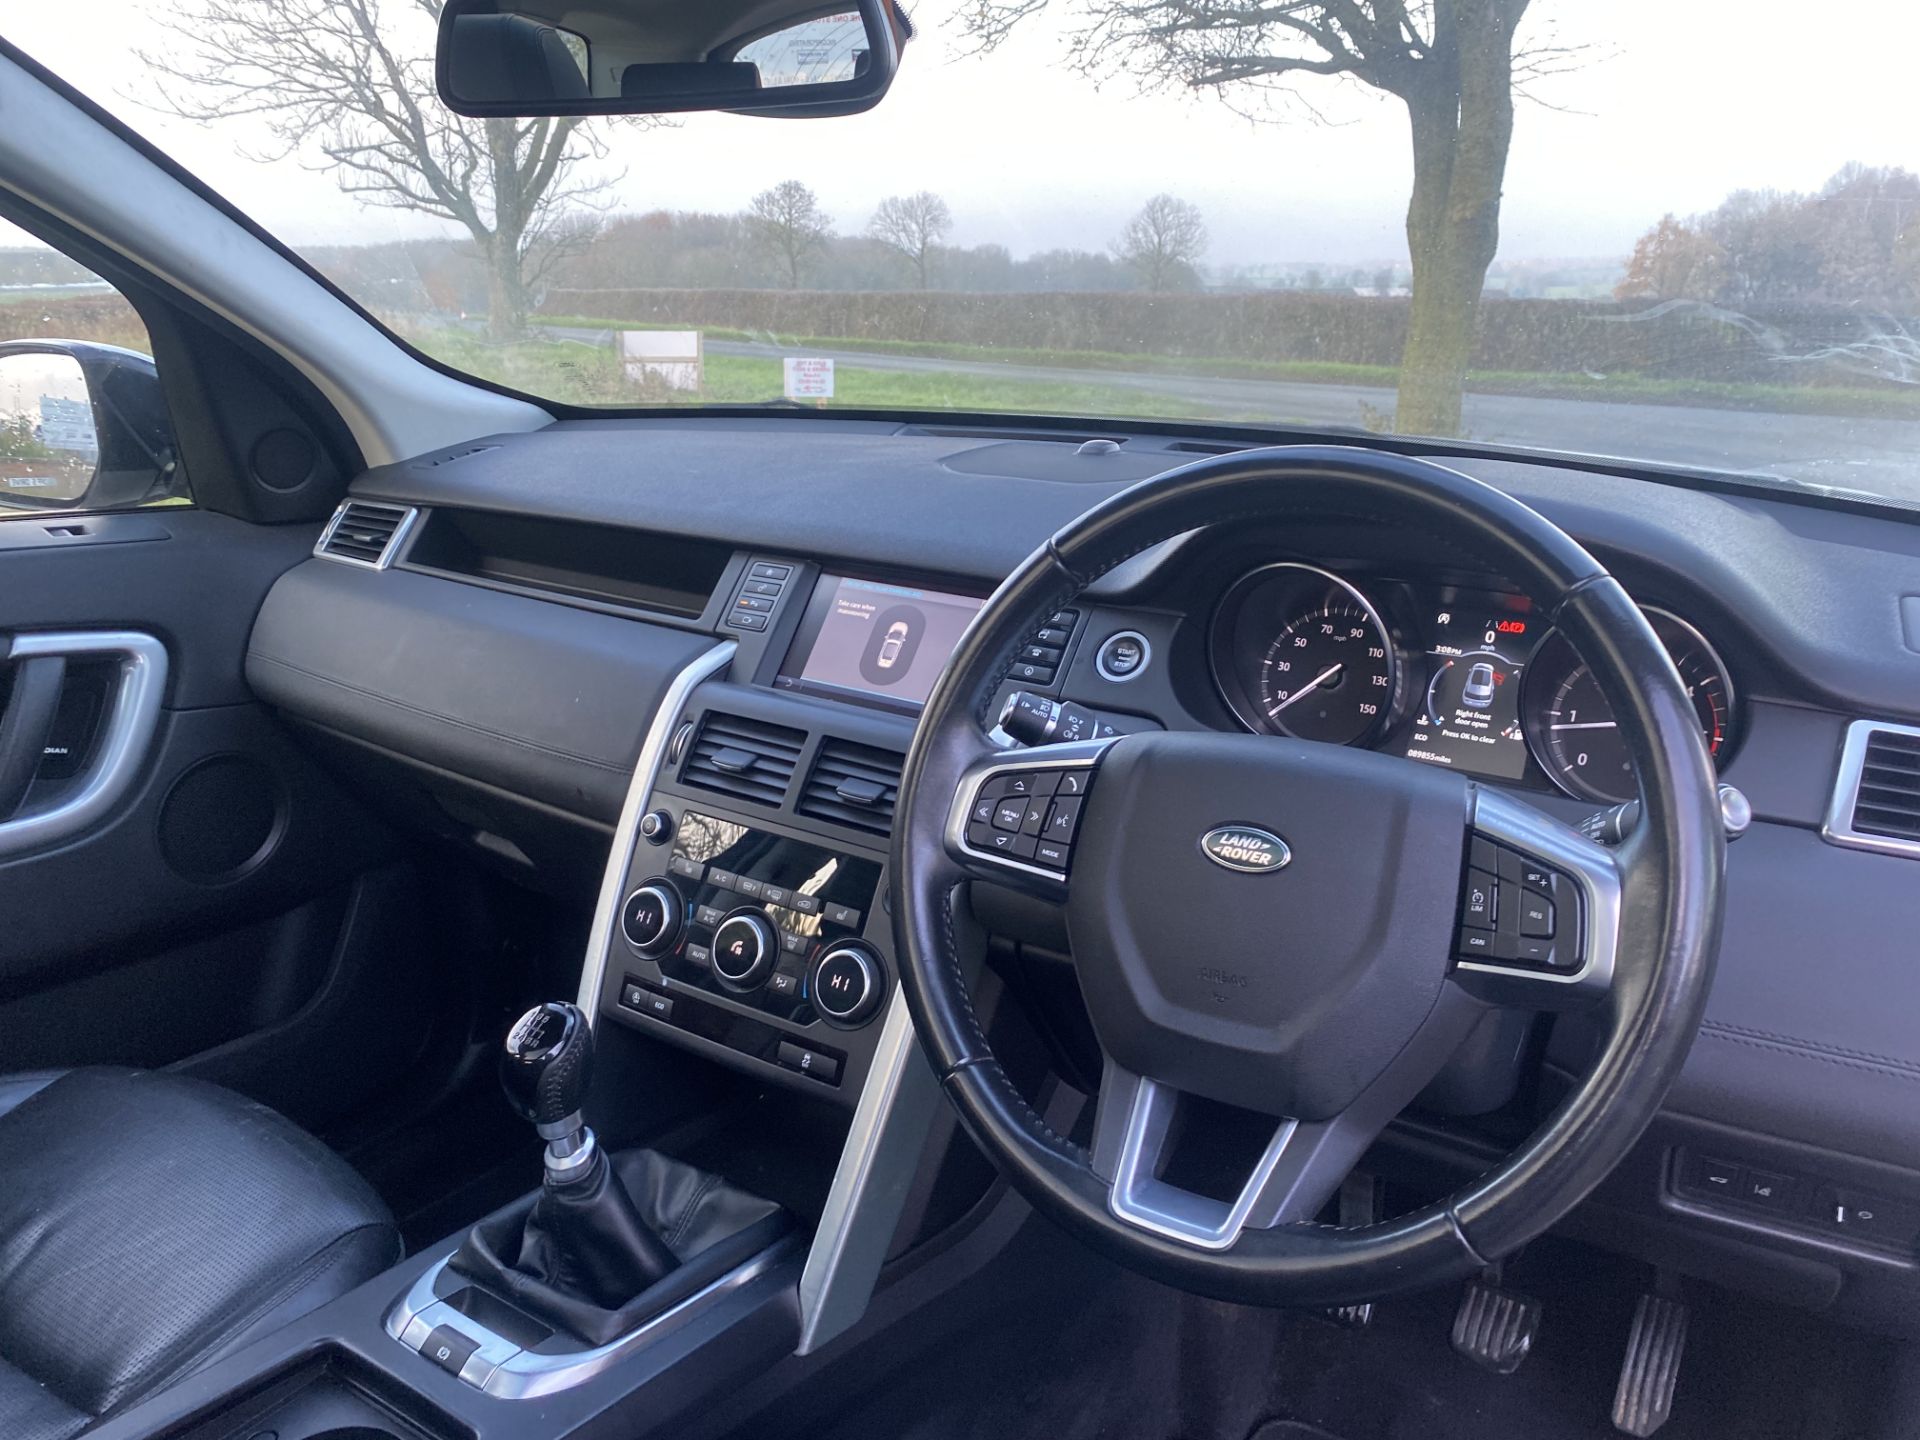 (ON SALE) LANDROVER DISCOVERY SPORT "HSE" 18 REG - 1 OWNER - LEATHER PANORAMIC ROOF - FULLY LOADED - - Image 30 of 37